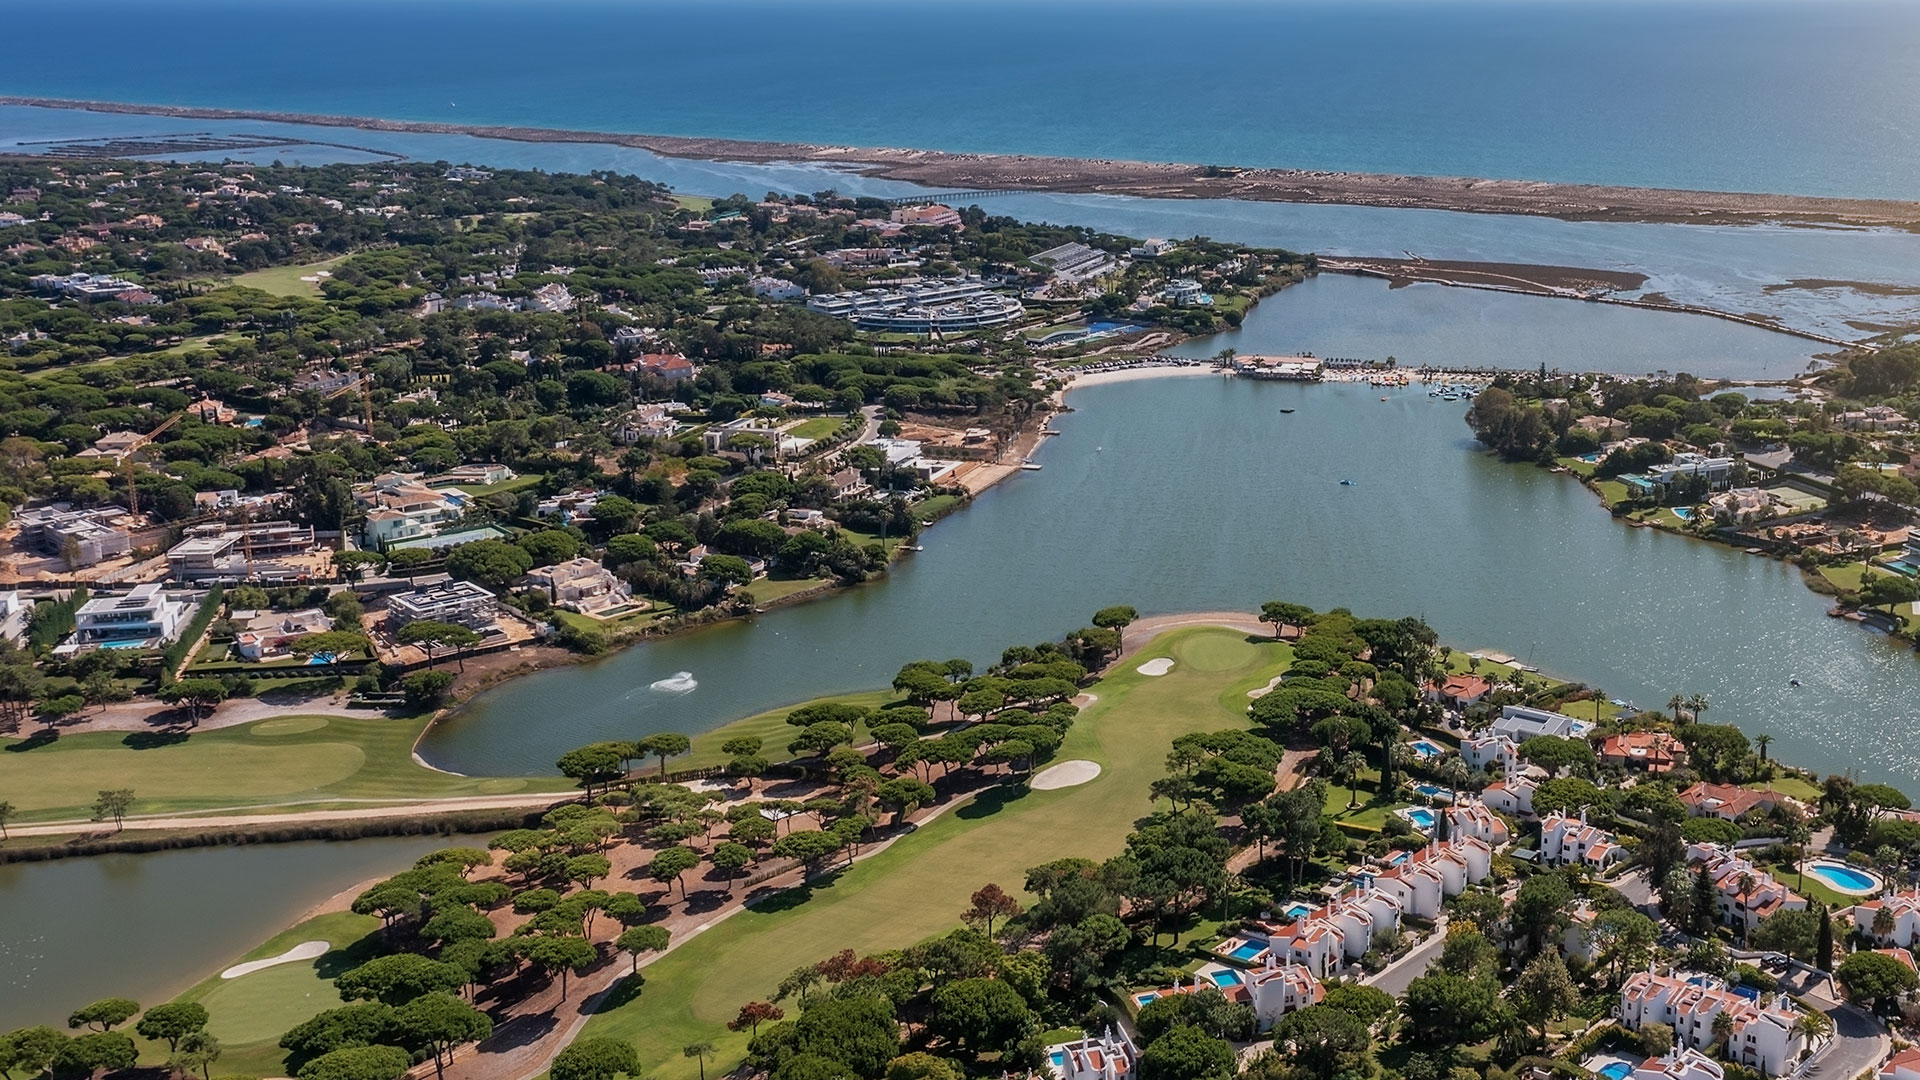 Aerial view of Vale do lobo, with the golf course